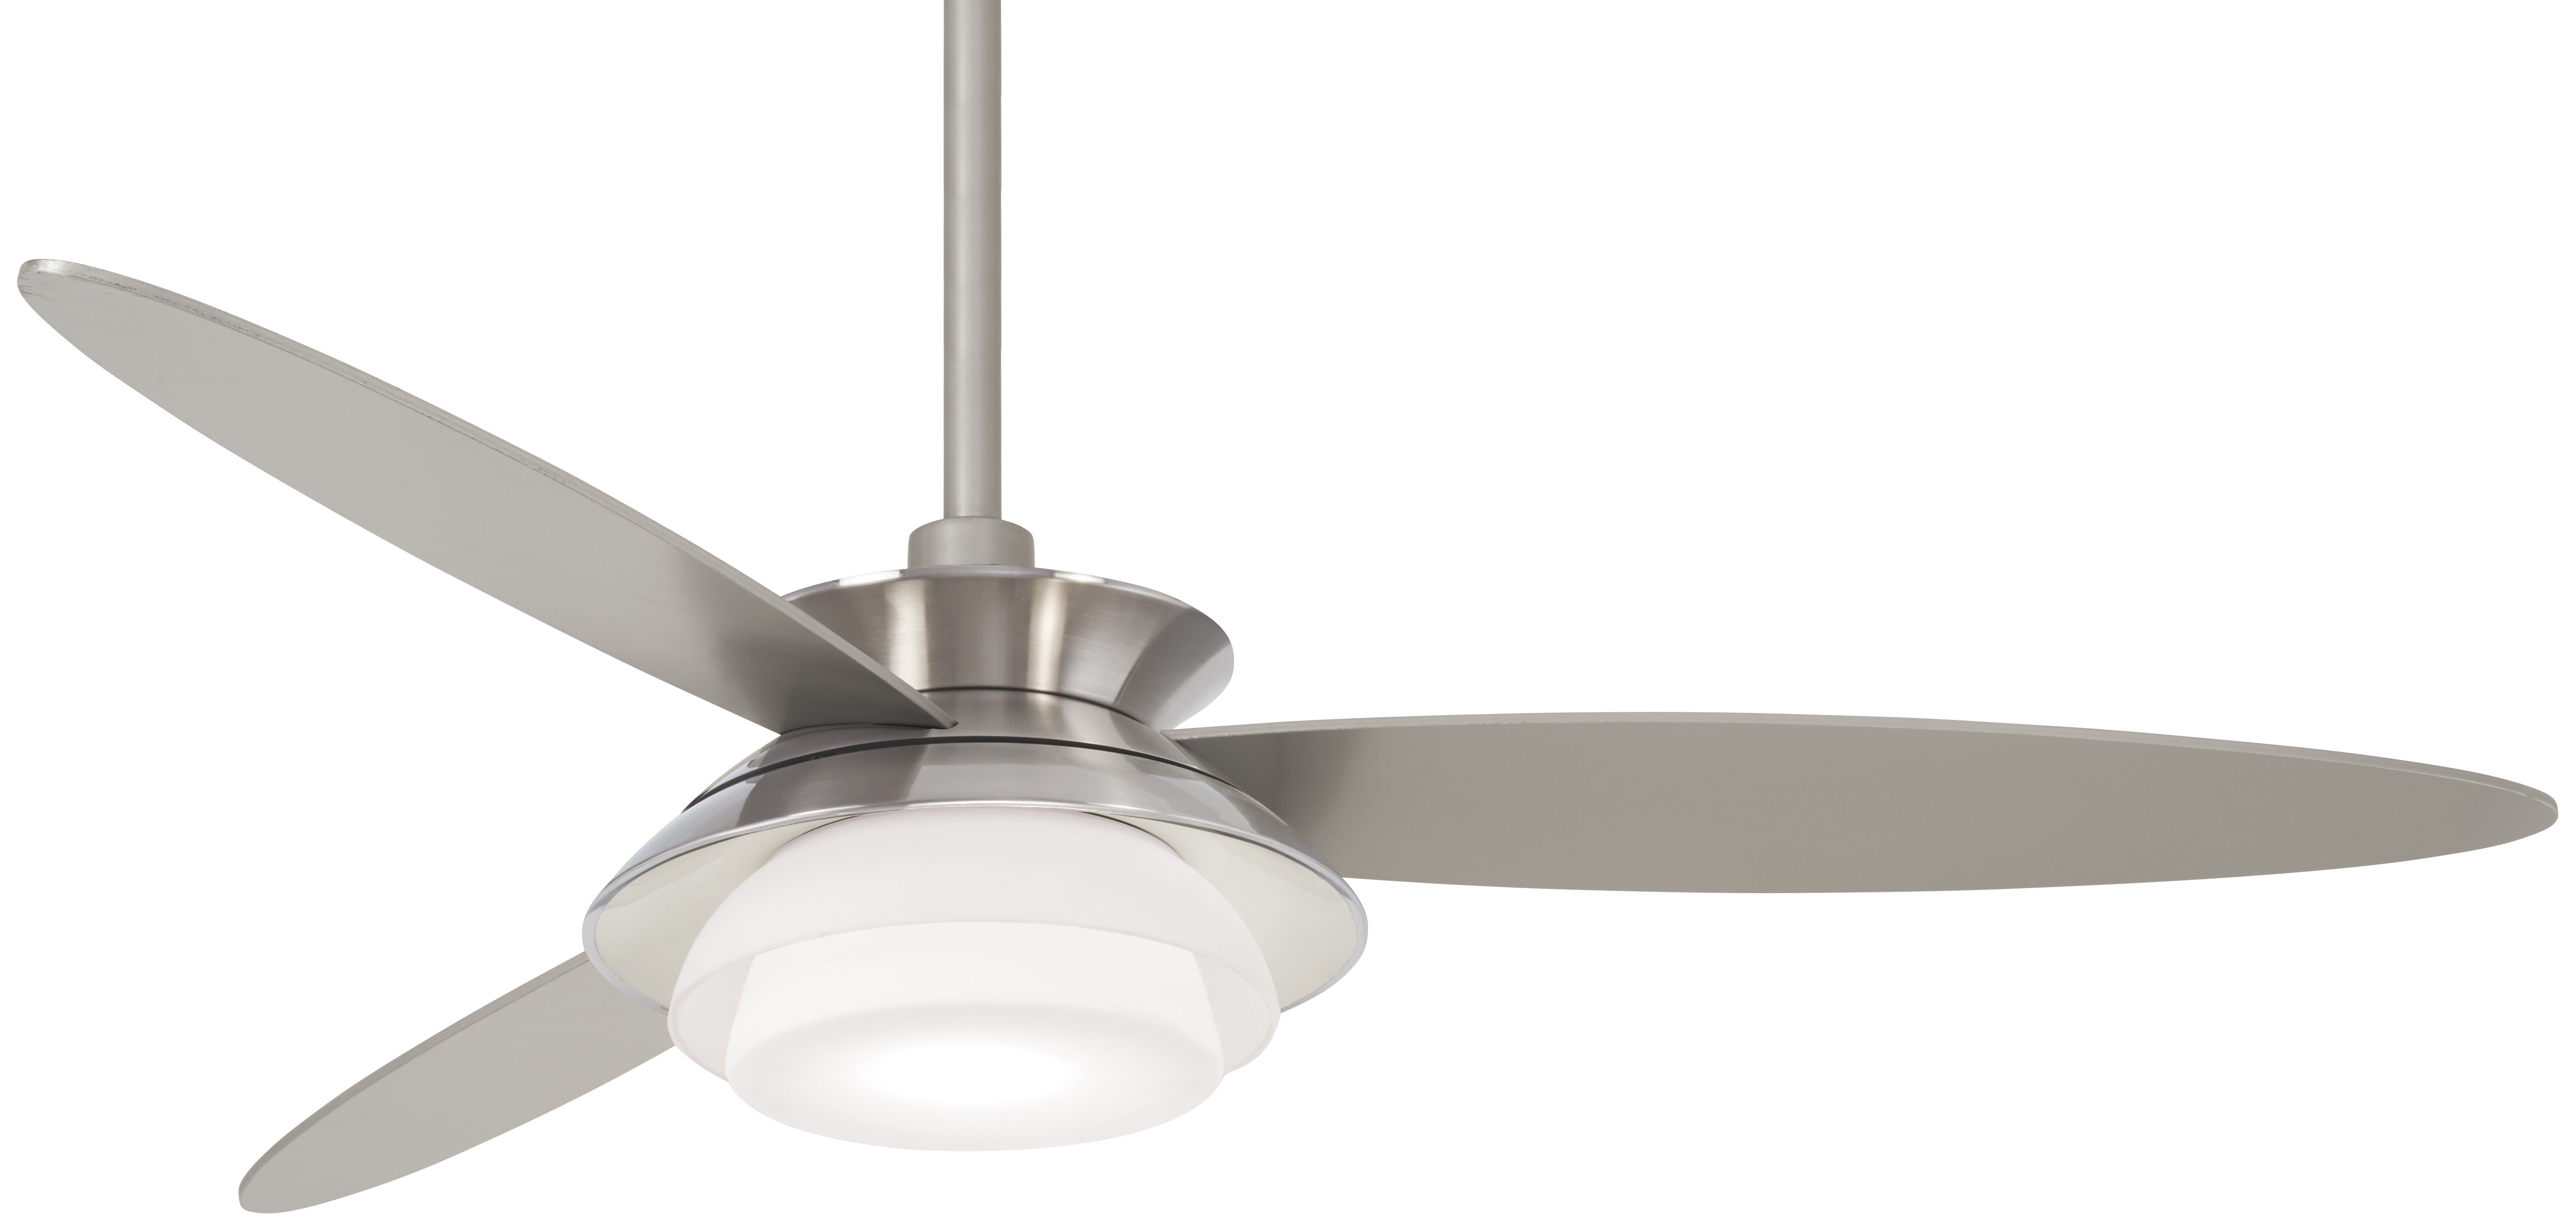 Minka Aire 56 Stack 3 Blade Led Ceiling Fan With Remote Wayfair regarding sizing 5651 X 2700